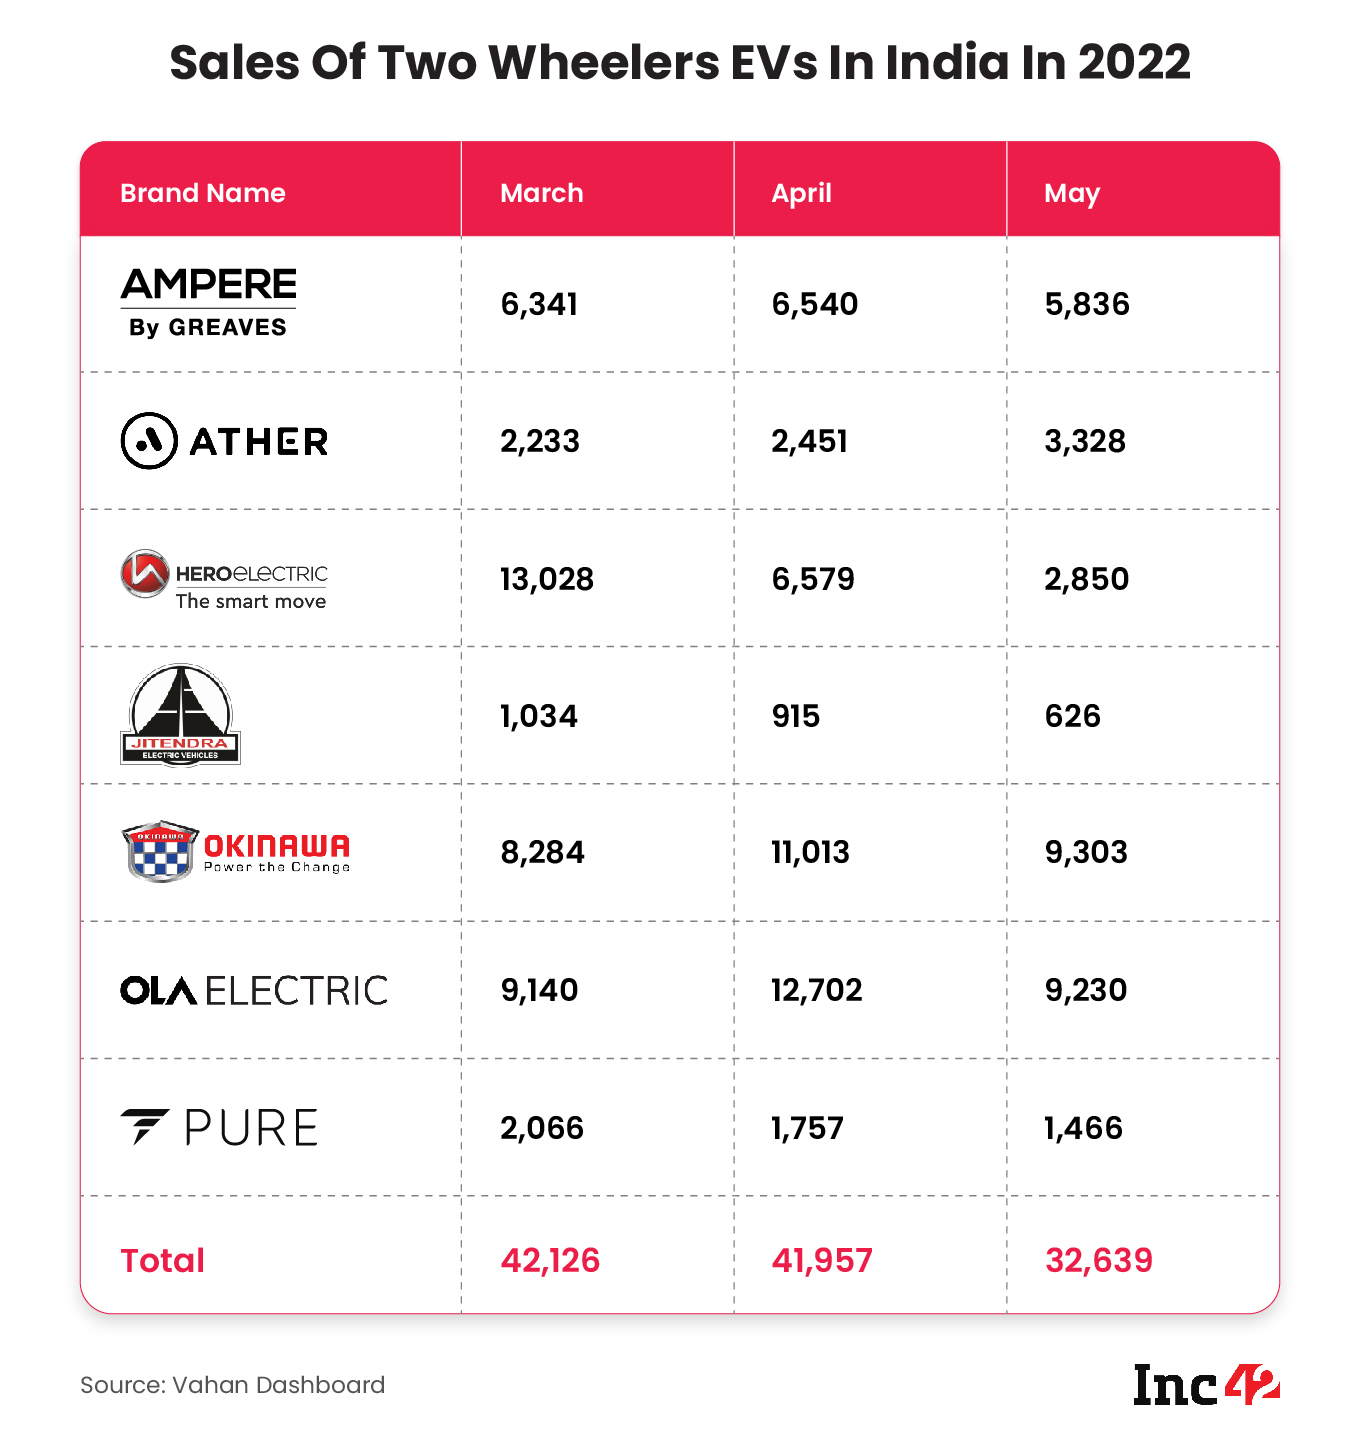 Fire Incidents, Supply Chain Crisis Drag Down Two-Wheeler EV Sales In May